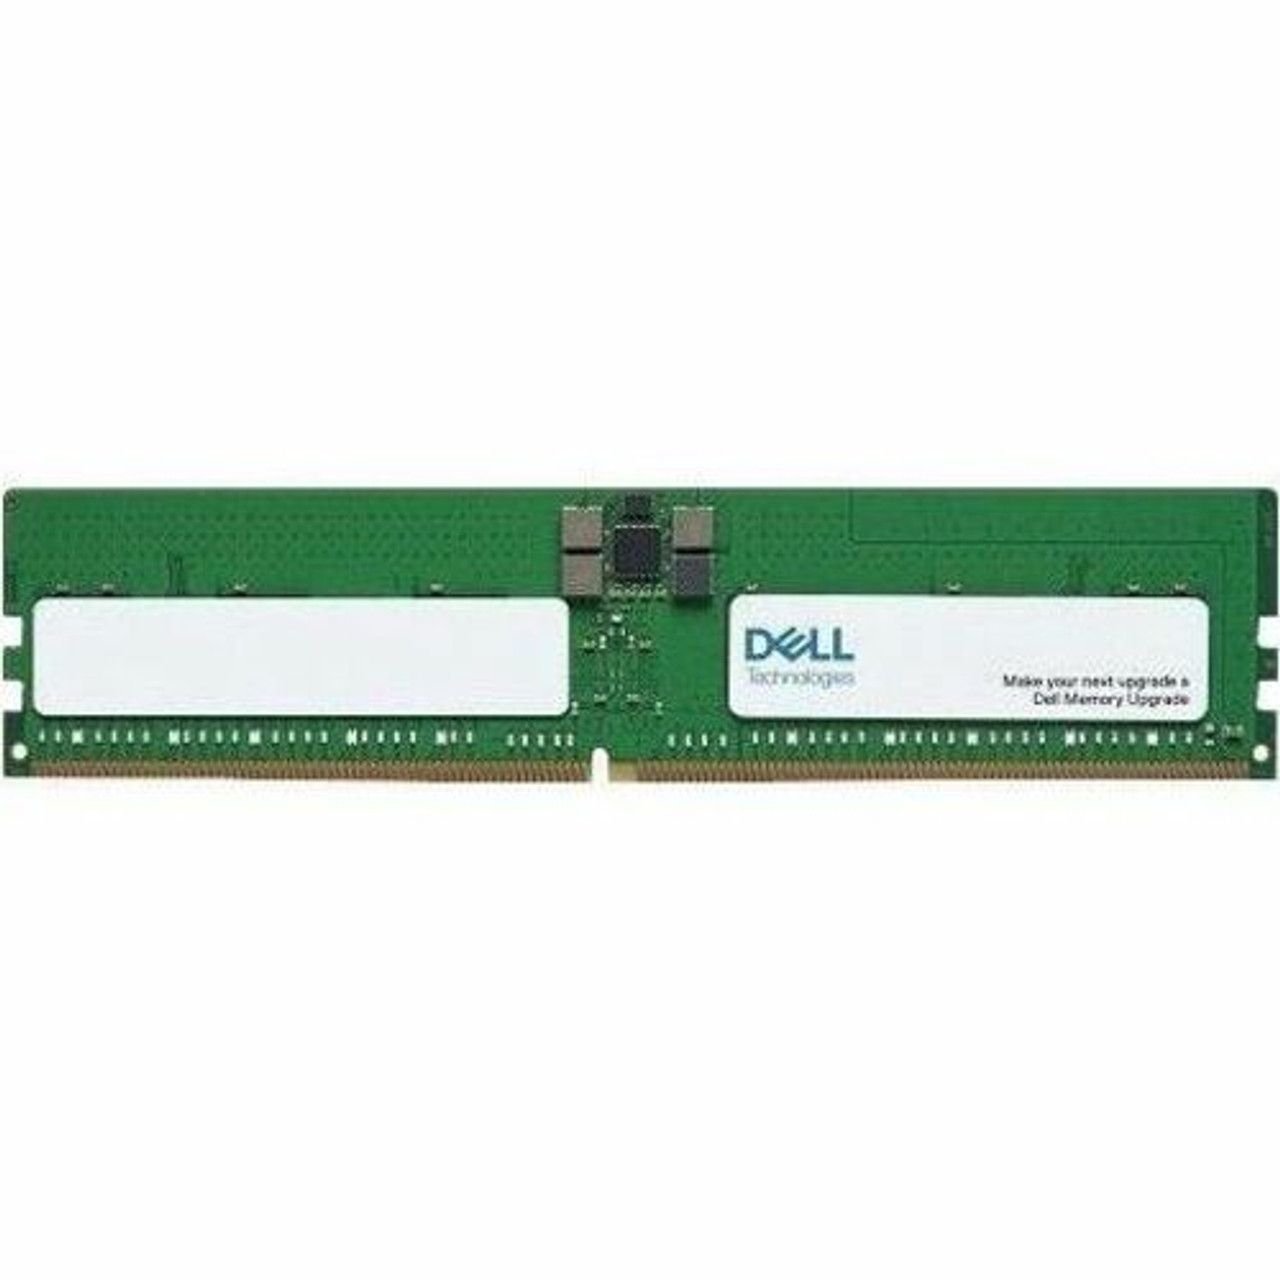 Dell Memory Upgrade - 16GB - 1RX8 DDR5 RDIMM 4800MHz_1